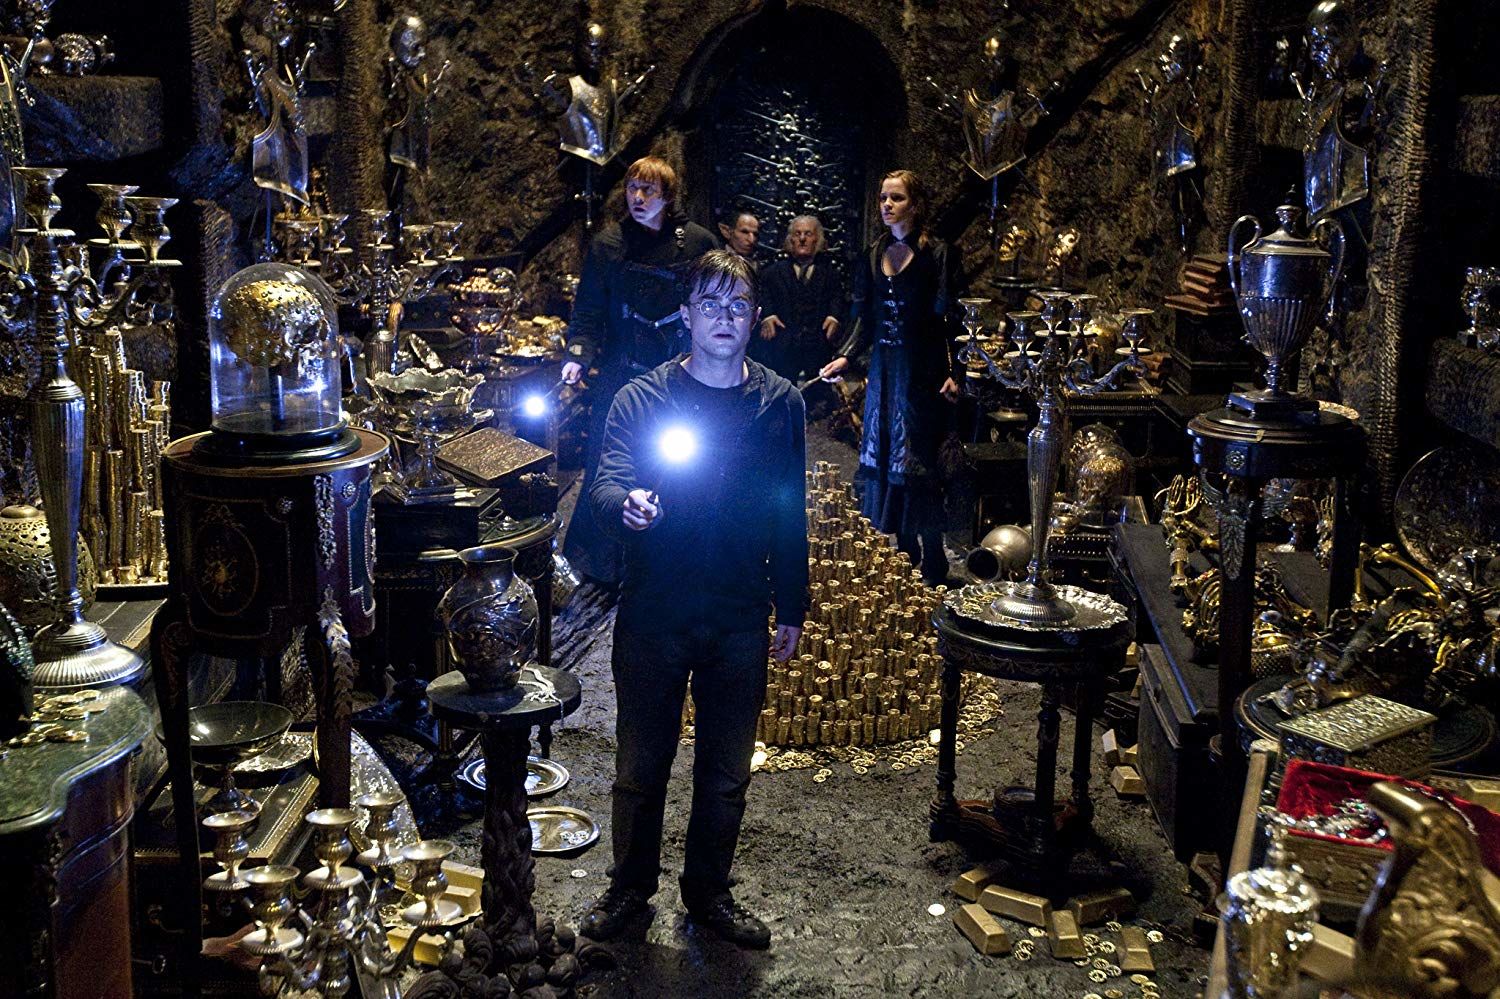 The Lestrange vault at Gringotta in Harry Potter and the Deathly Hallows Part 2